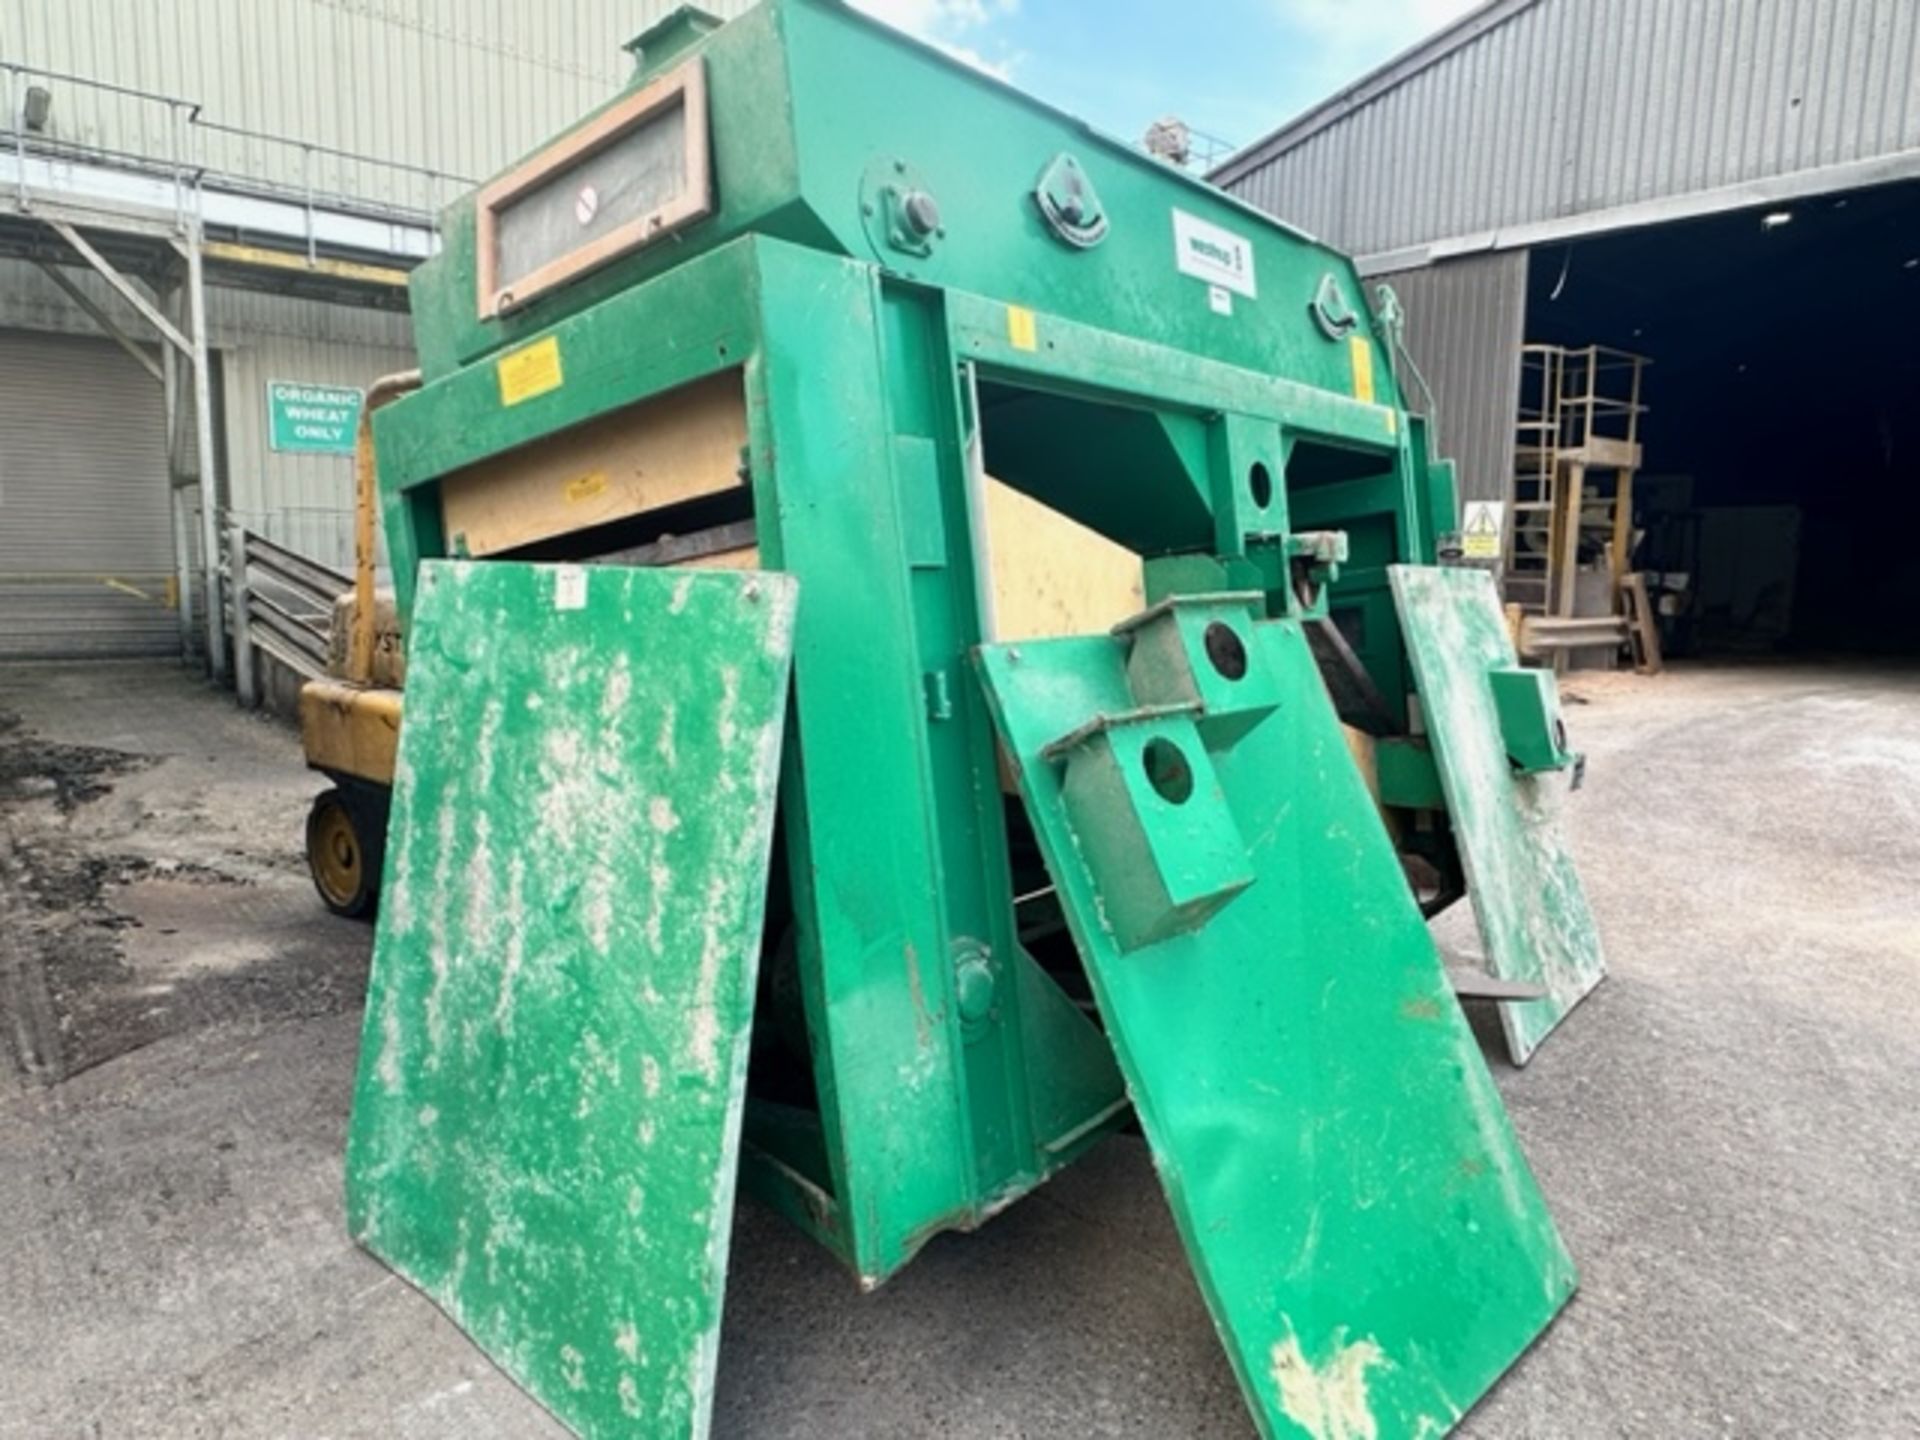 Westrup SAB-1000 Pre Cleaner Machine (no aspiration fan). Loading free of charge - yes. Lot location - Image 12 of 15